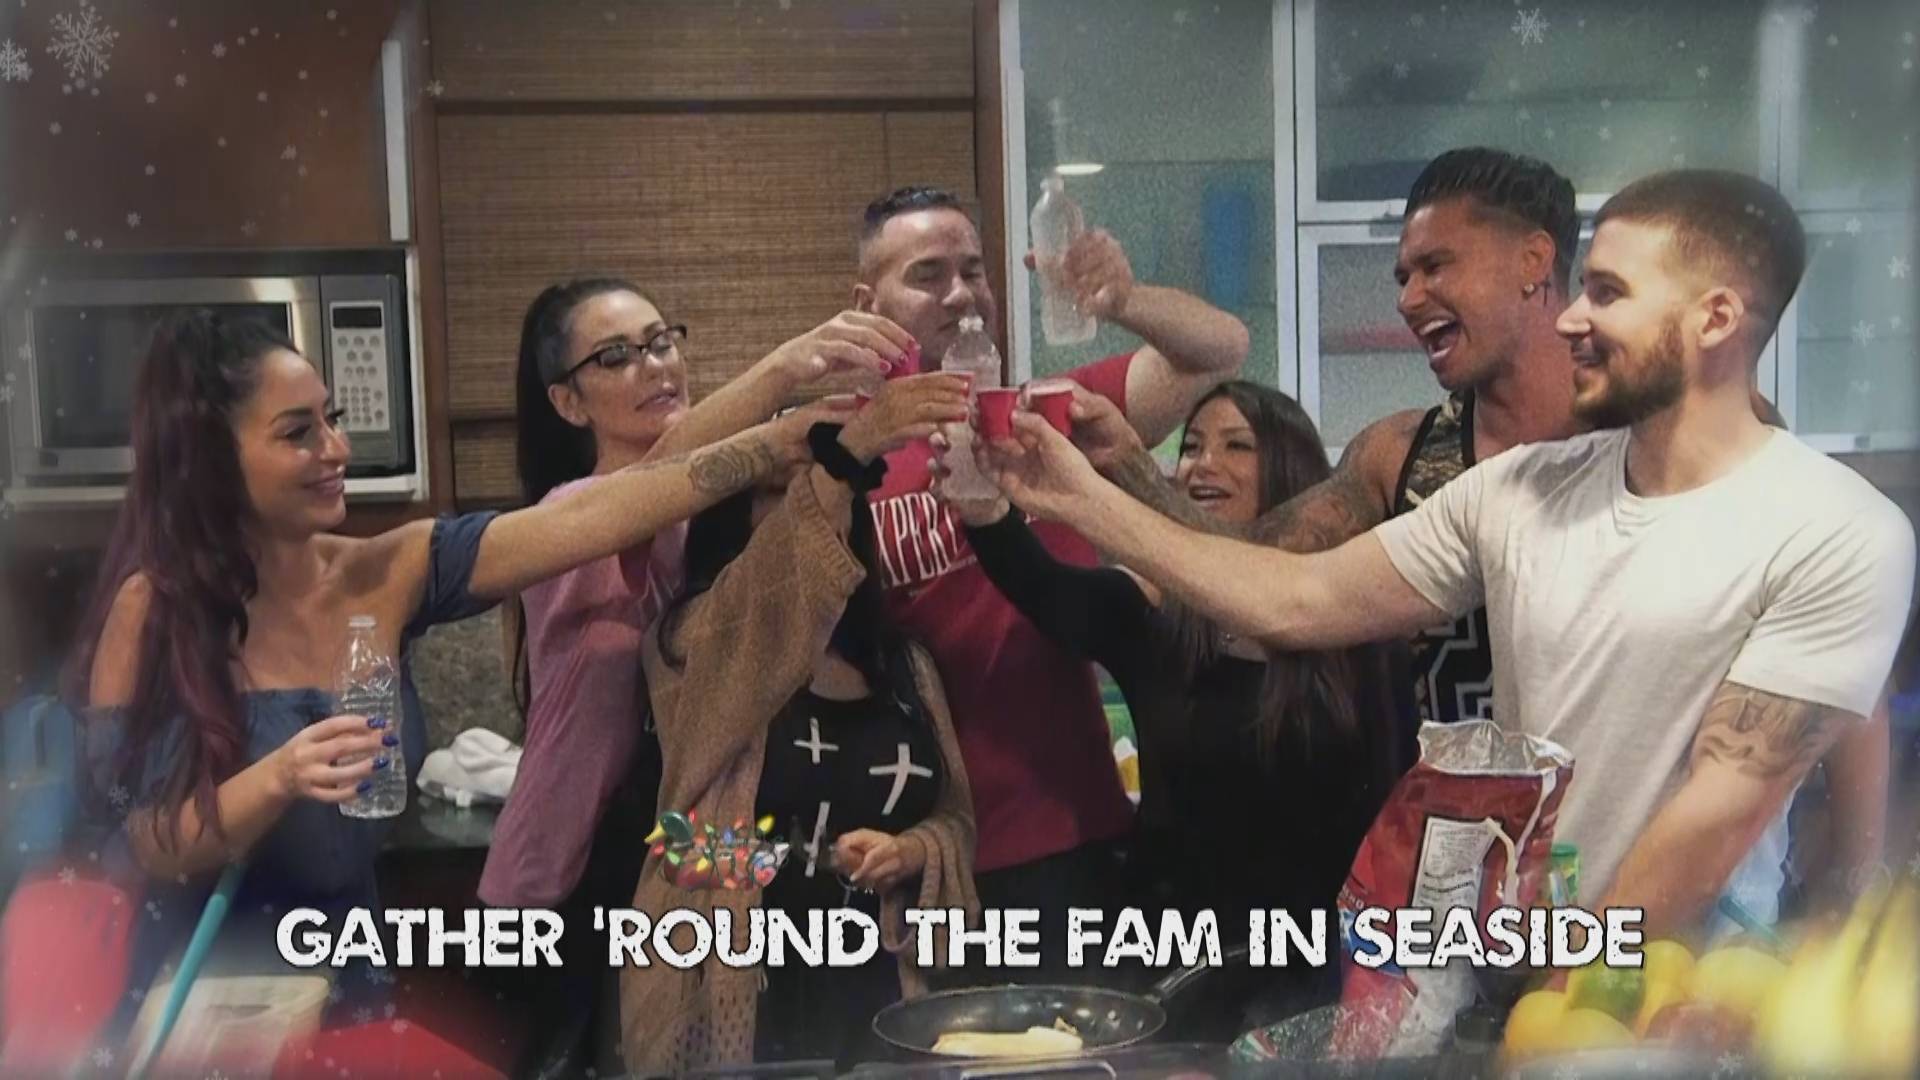 ambitie Hoelahoep Nutteloos MTV's Jersey Shore Singers - "Jerzday Night" - Jersey Shore Family Vacation  (Video Clip) | MTV